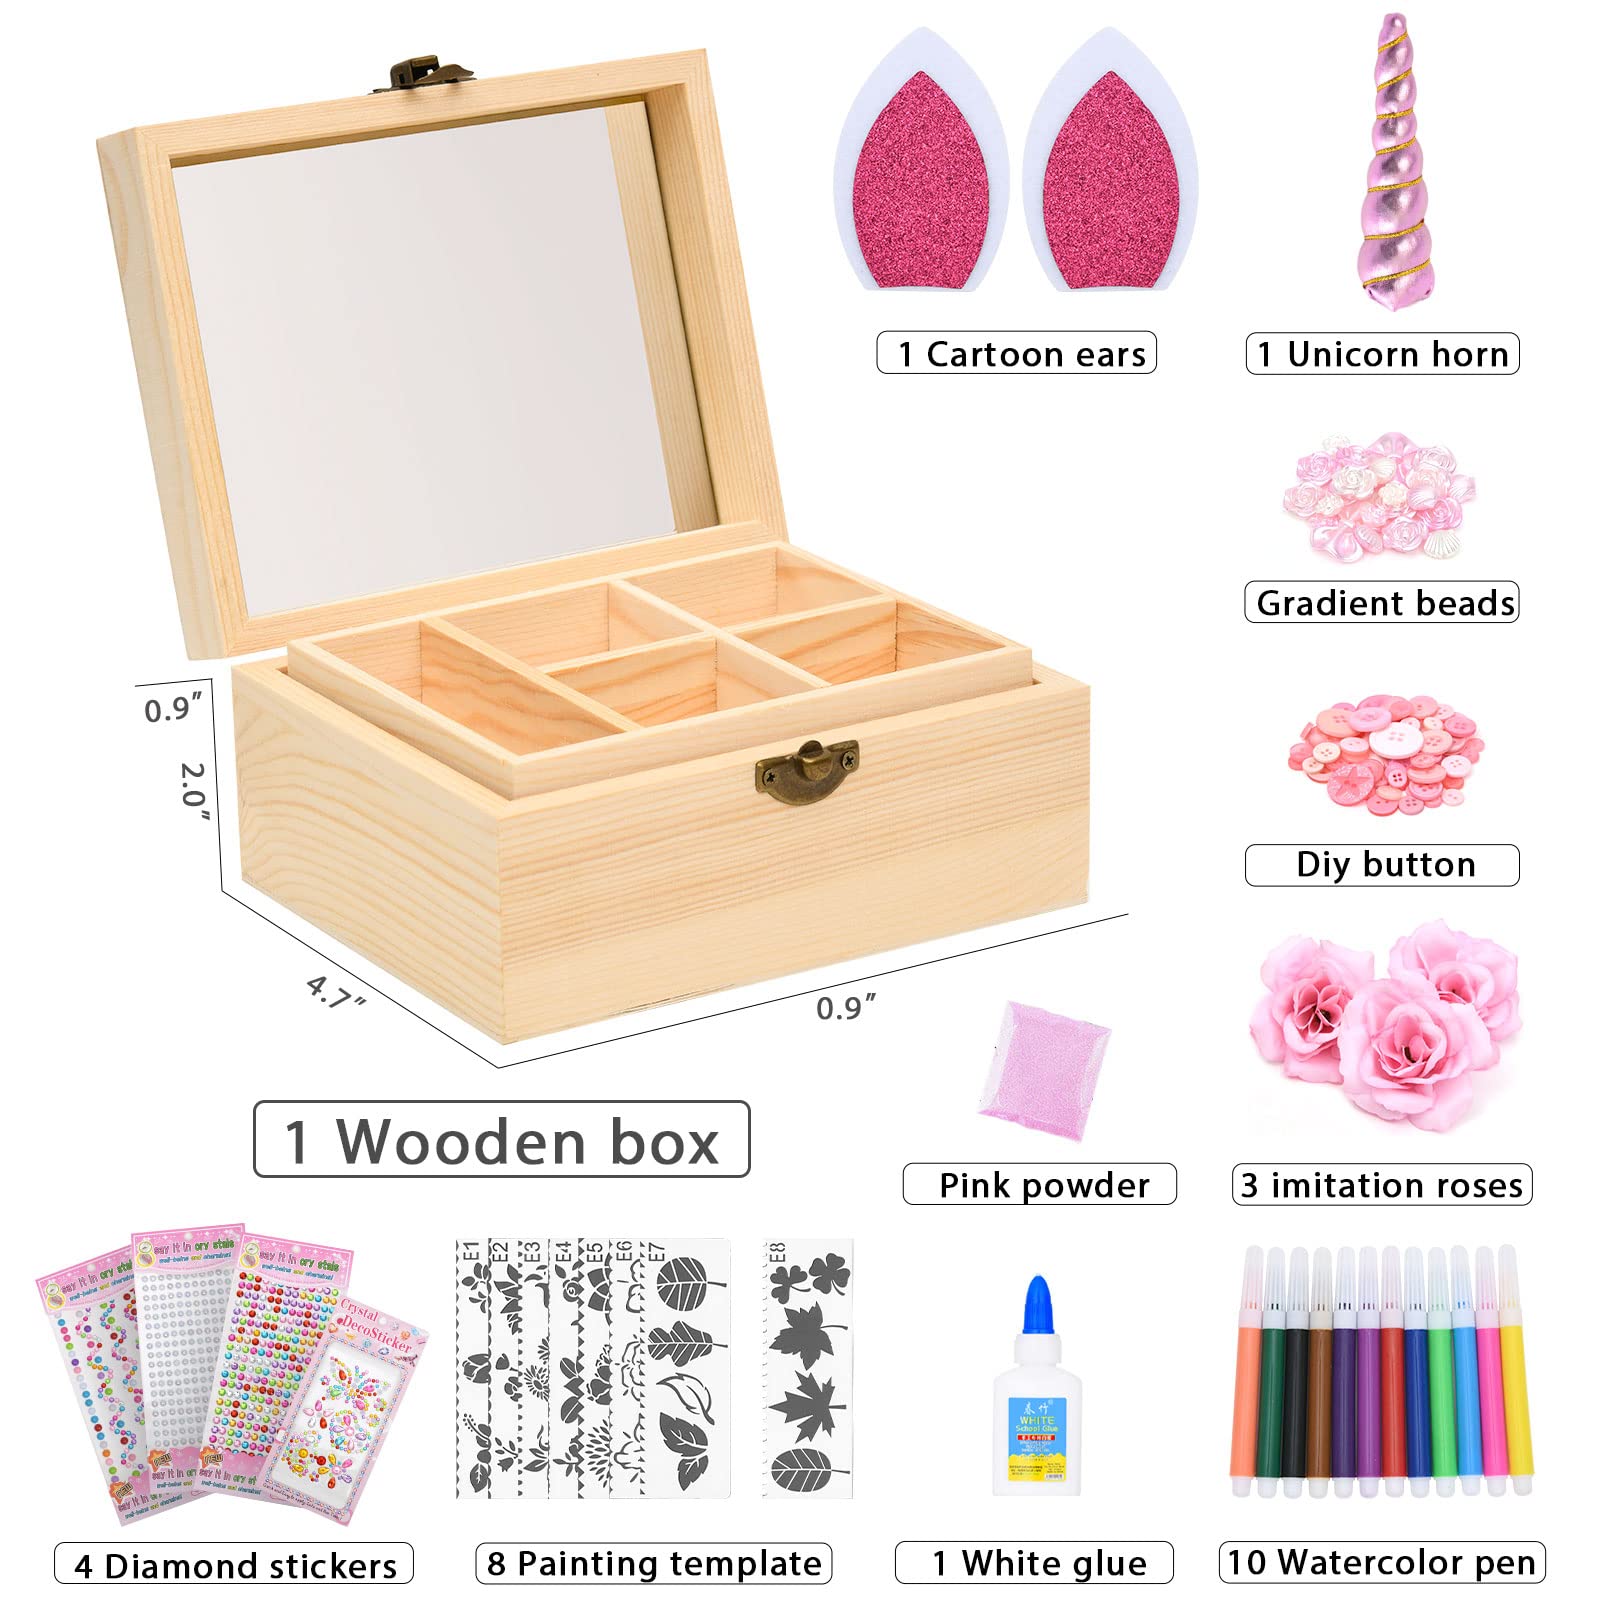 Decorate Your Own Unicorn Jewelry Box for Girls Painting Arts Crafts for Kid 3 4 5 6 7 8 9 10 Girl Birthday Gifts Unicorn Storage Box Treasure Jewelry Wooden Box Craft Making Kit Toy for Girls 8-12